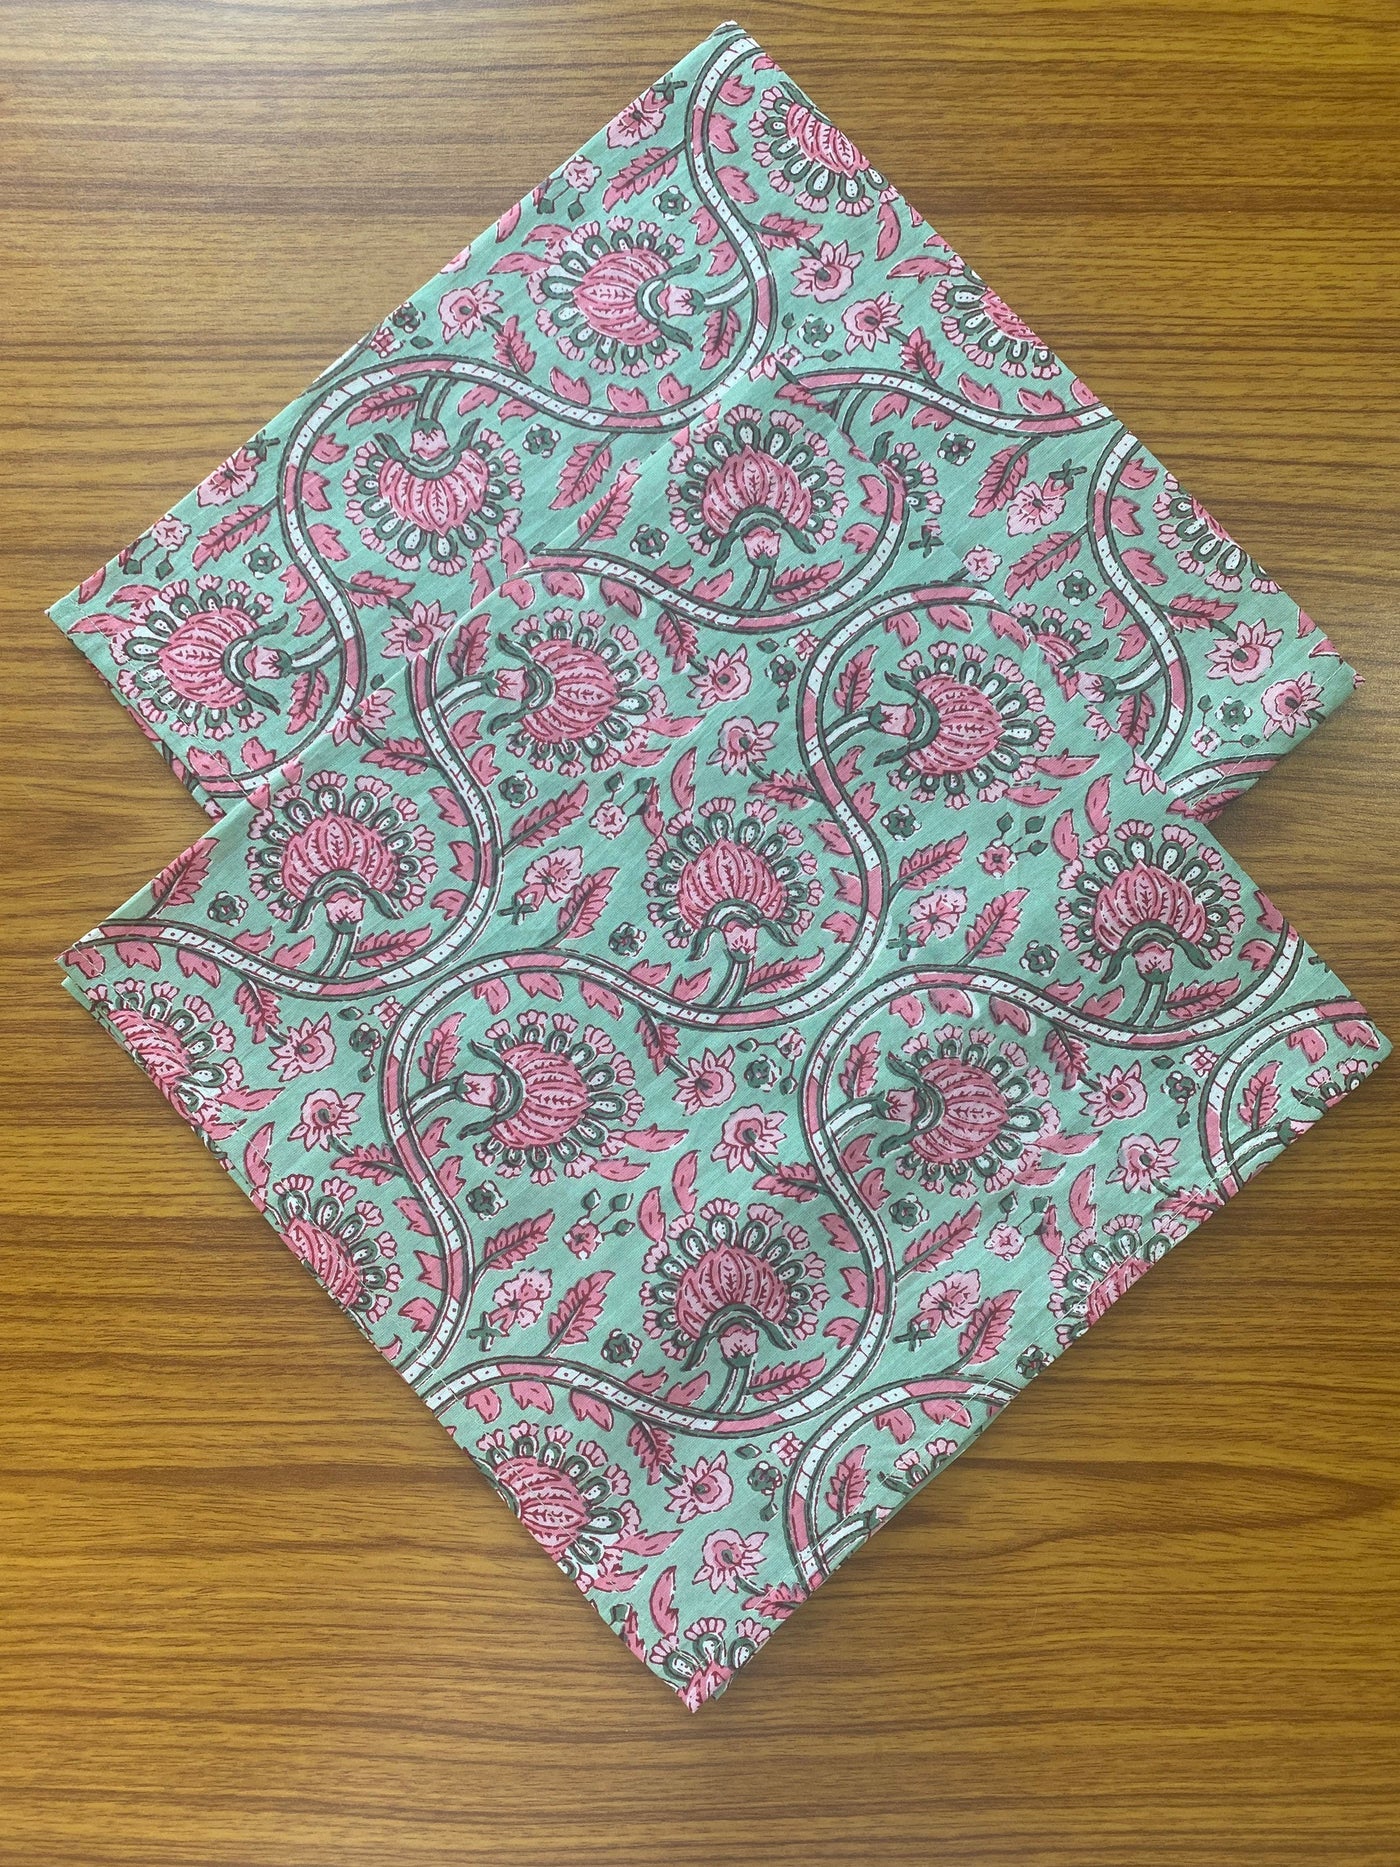 Fabricrush Tea and Middle Green, Salmon Pink Indian Floral Hand Block Printed Pure Cotton Cloth Napkins, 18x18"- Cocktail Napkins, 20x20"- Dinner Napkins